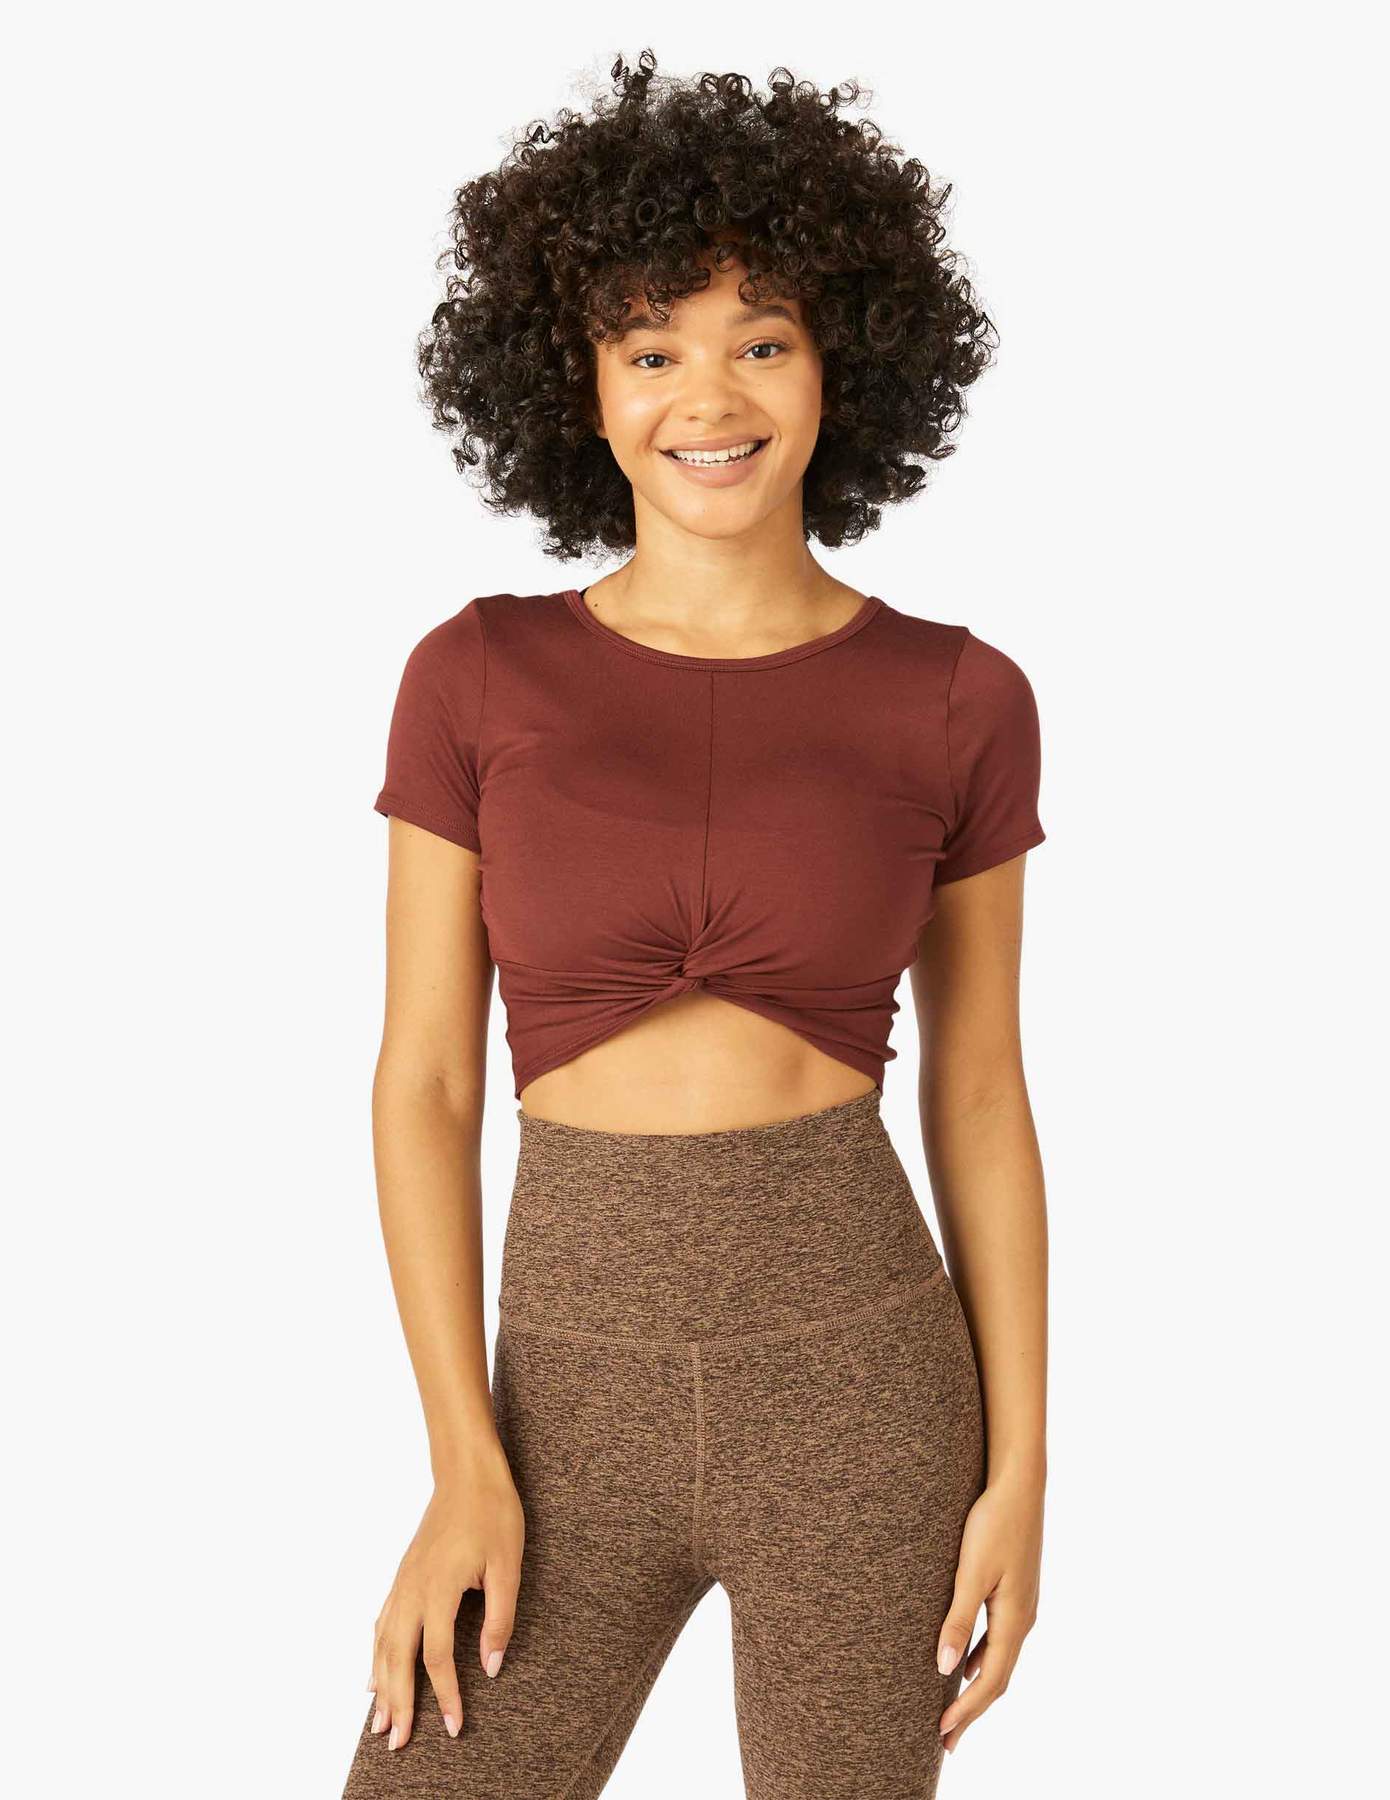 Popular Twisted Reversible Cotton Spandex Cropped Women's YogaTee